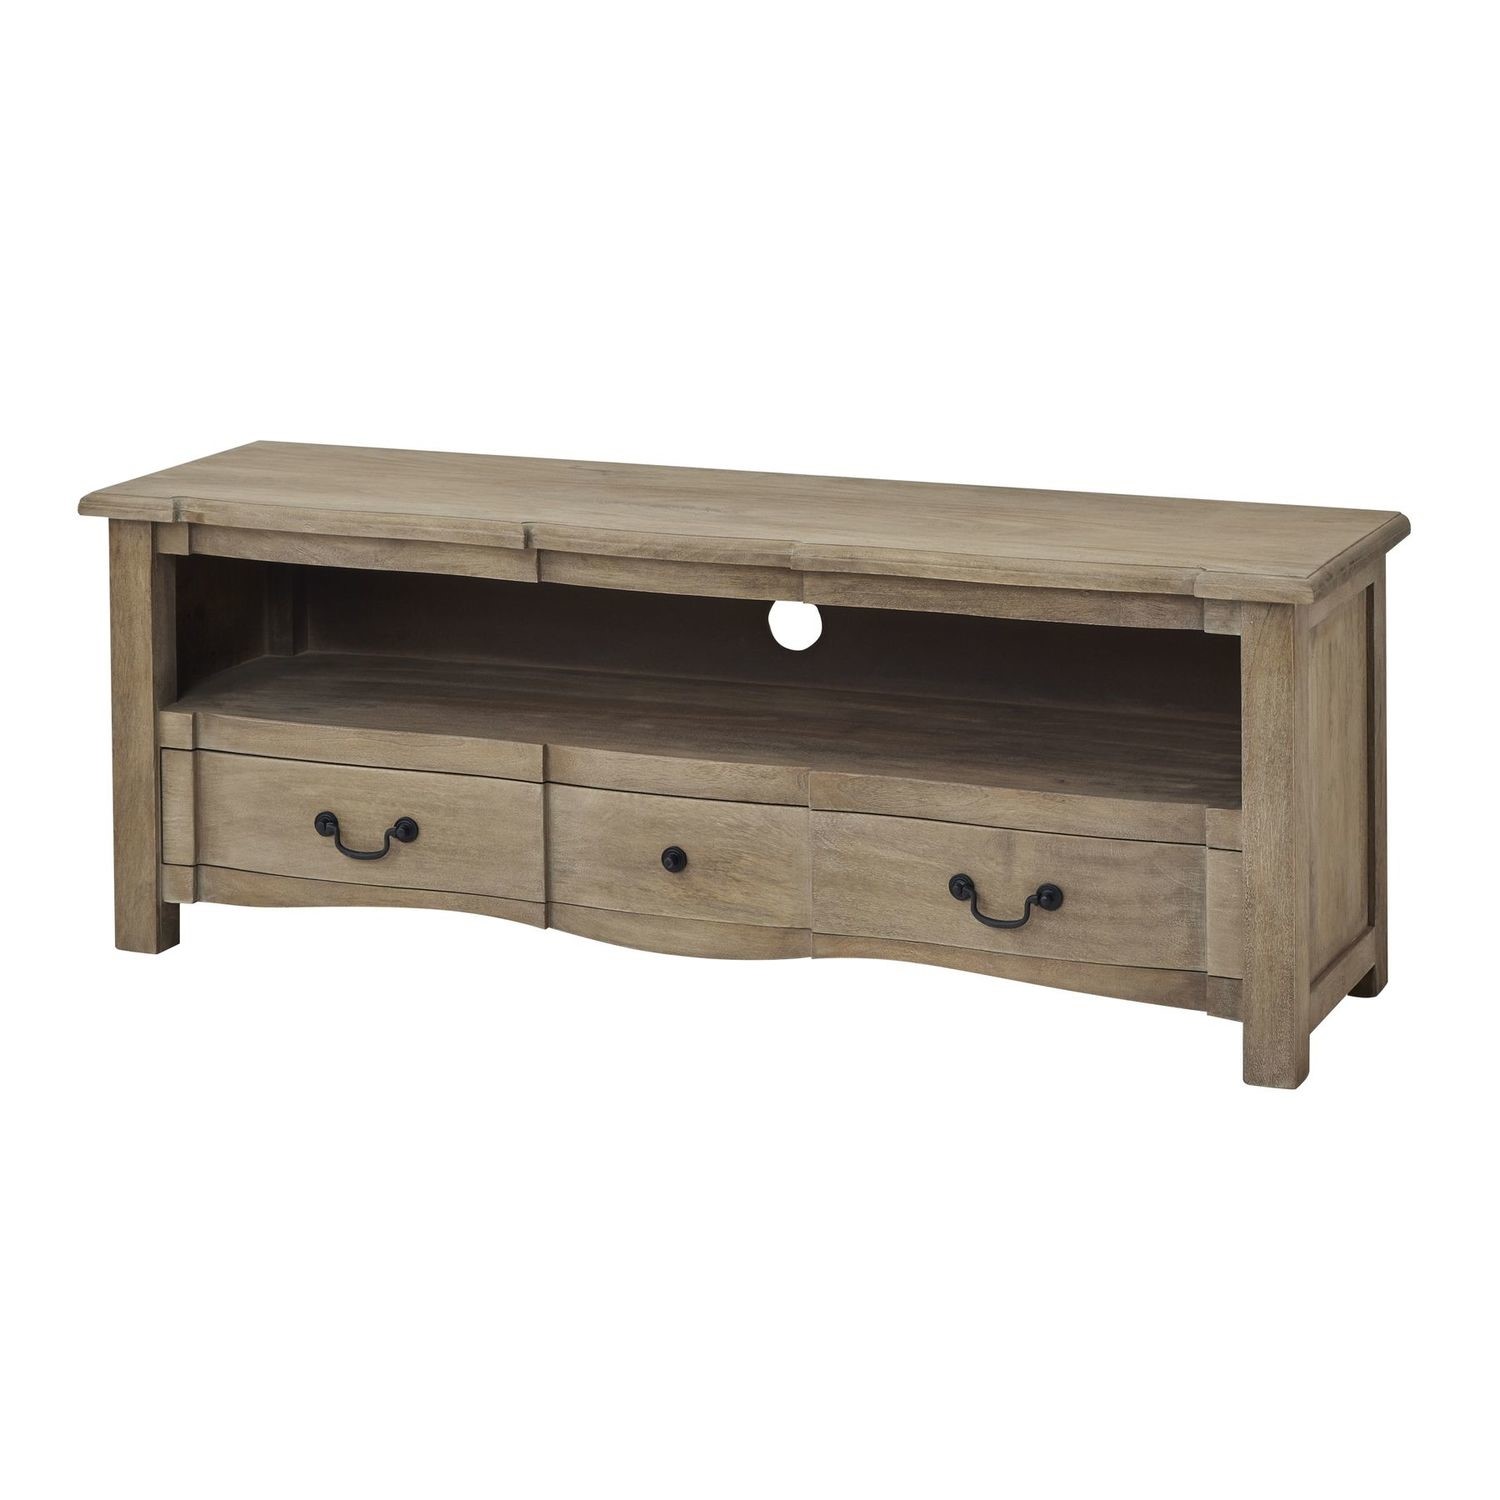 Read more about Copgrove collection 1 drawer media unit